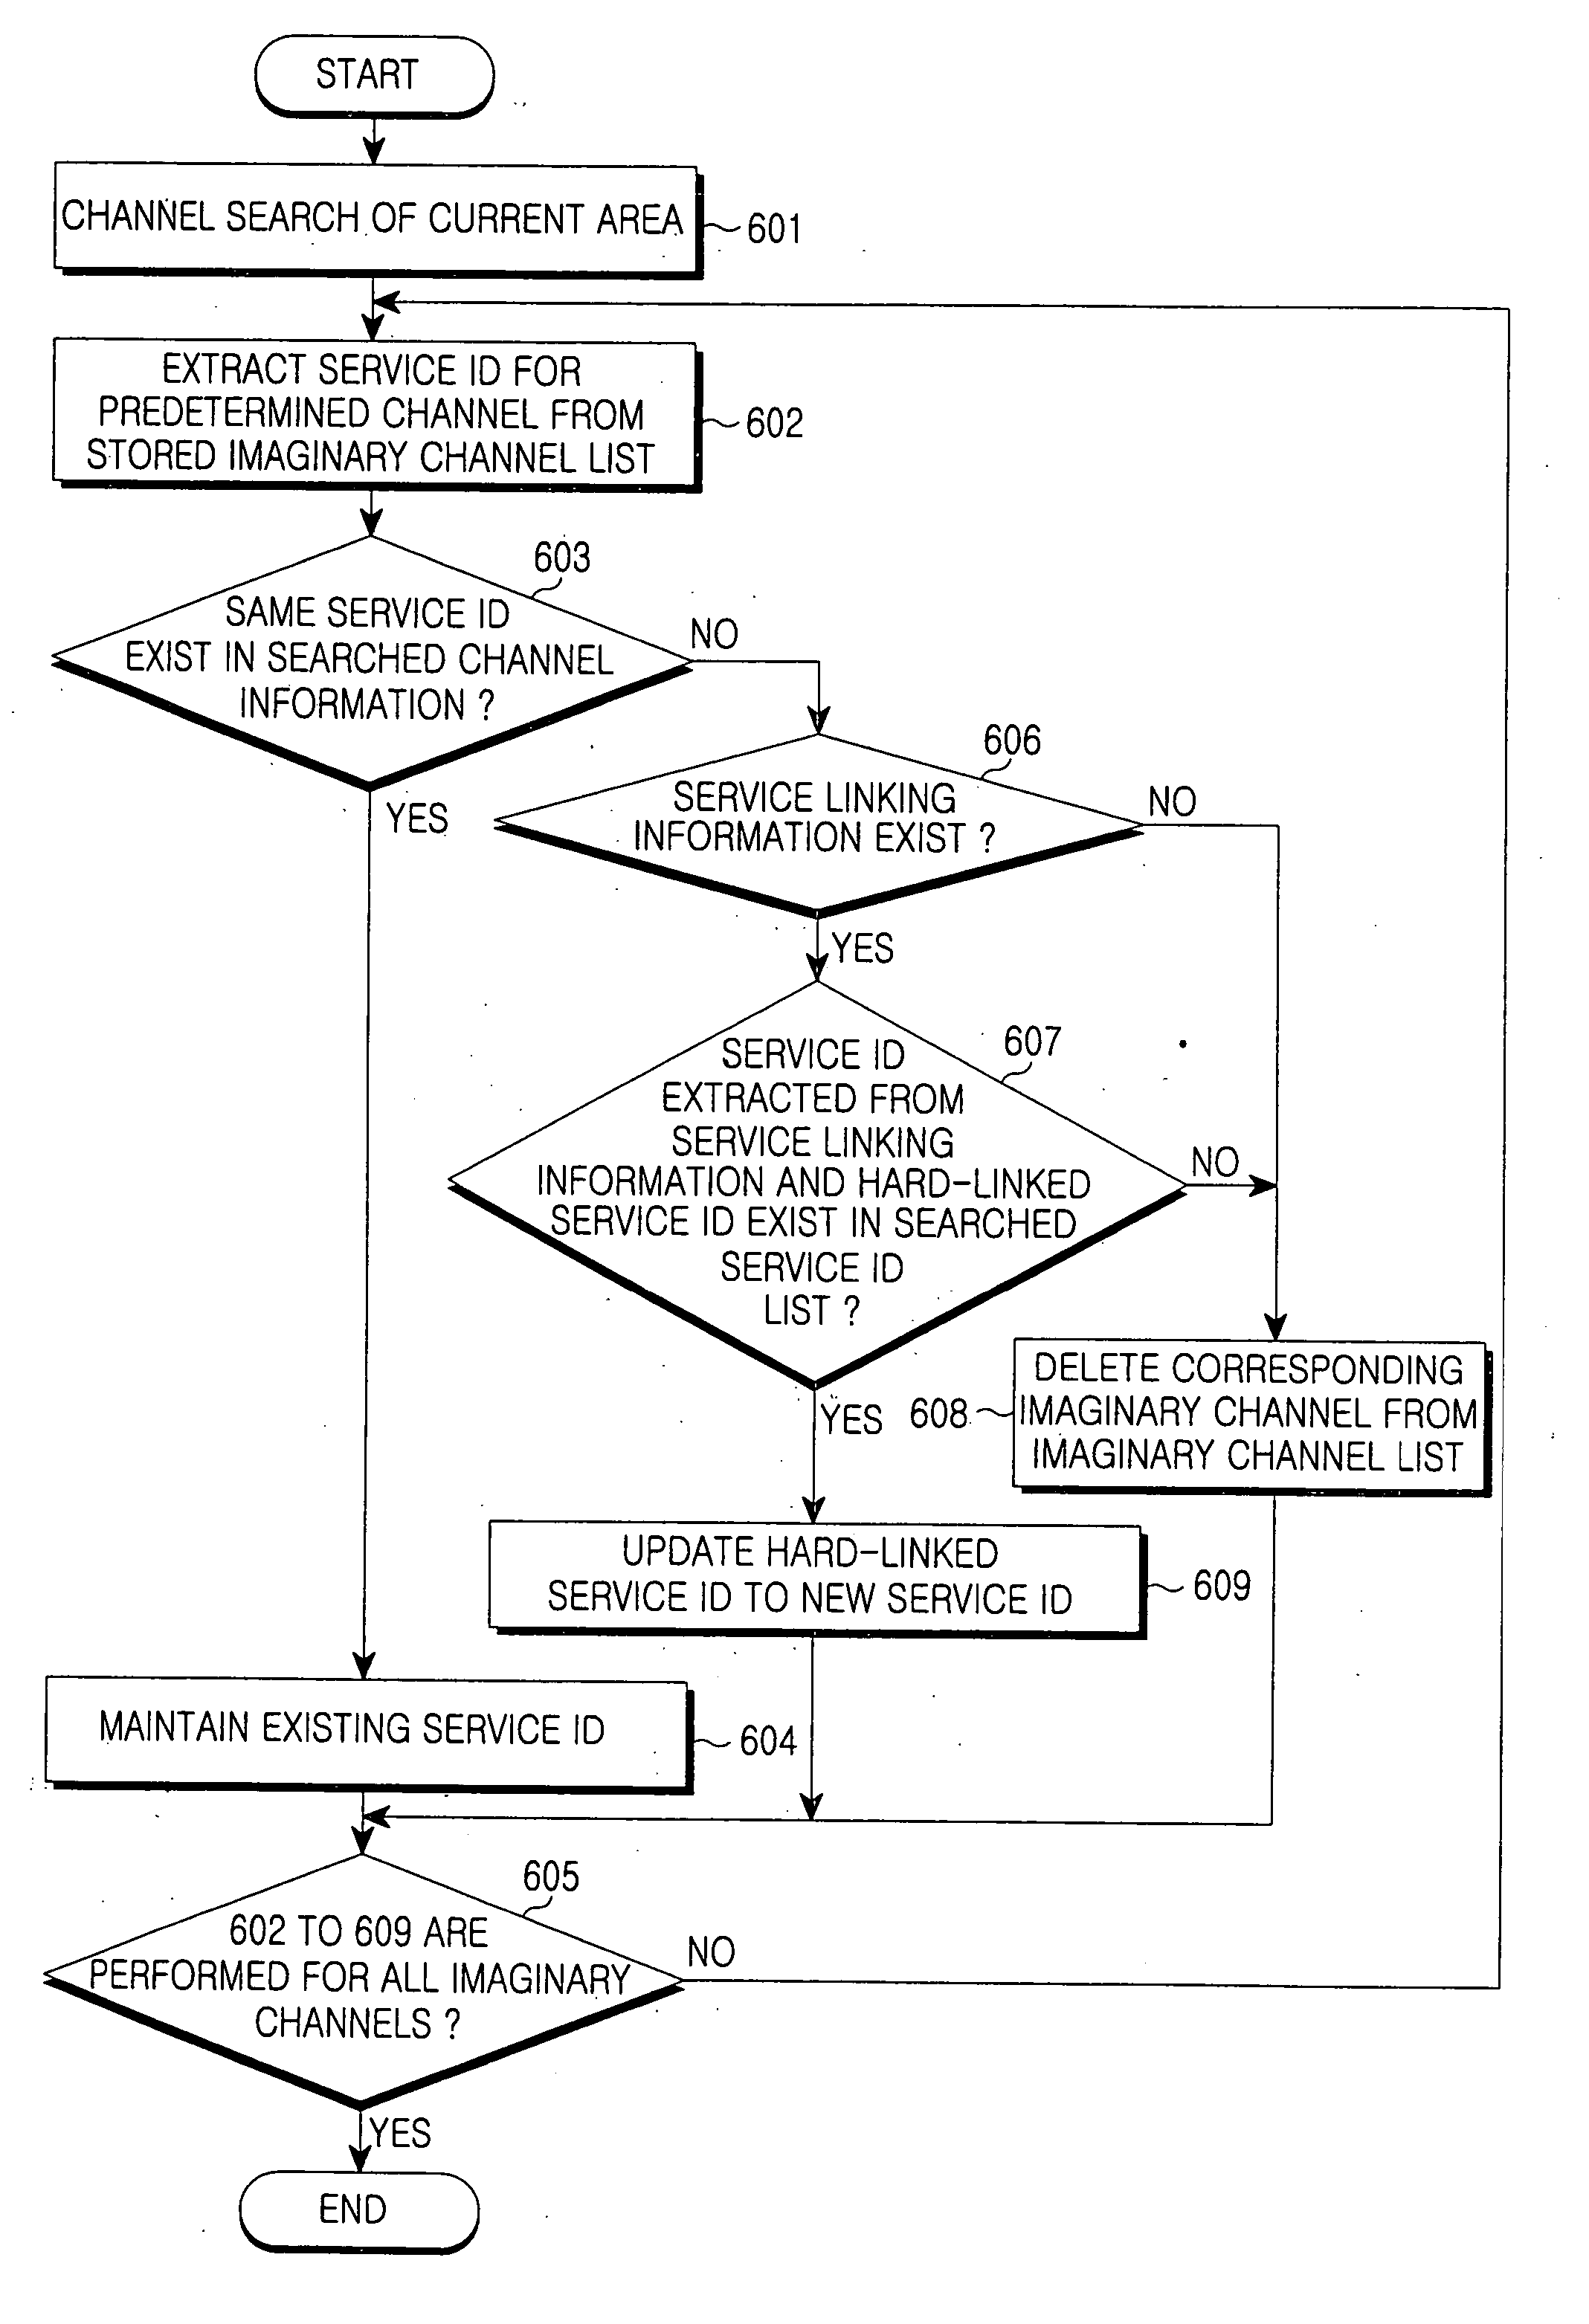 Terrestrial DMB receiver using imaginary channel to receive broadcasting services